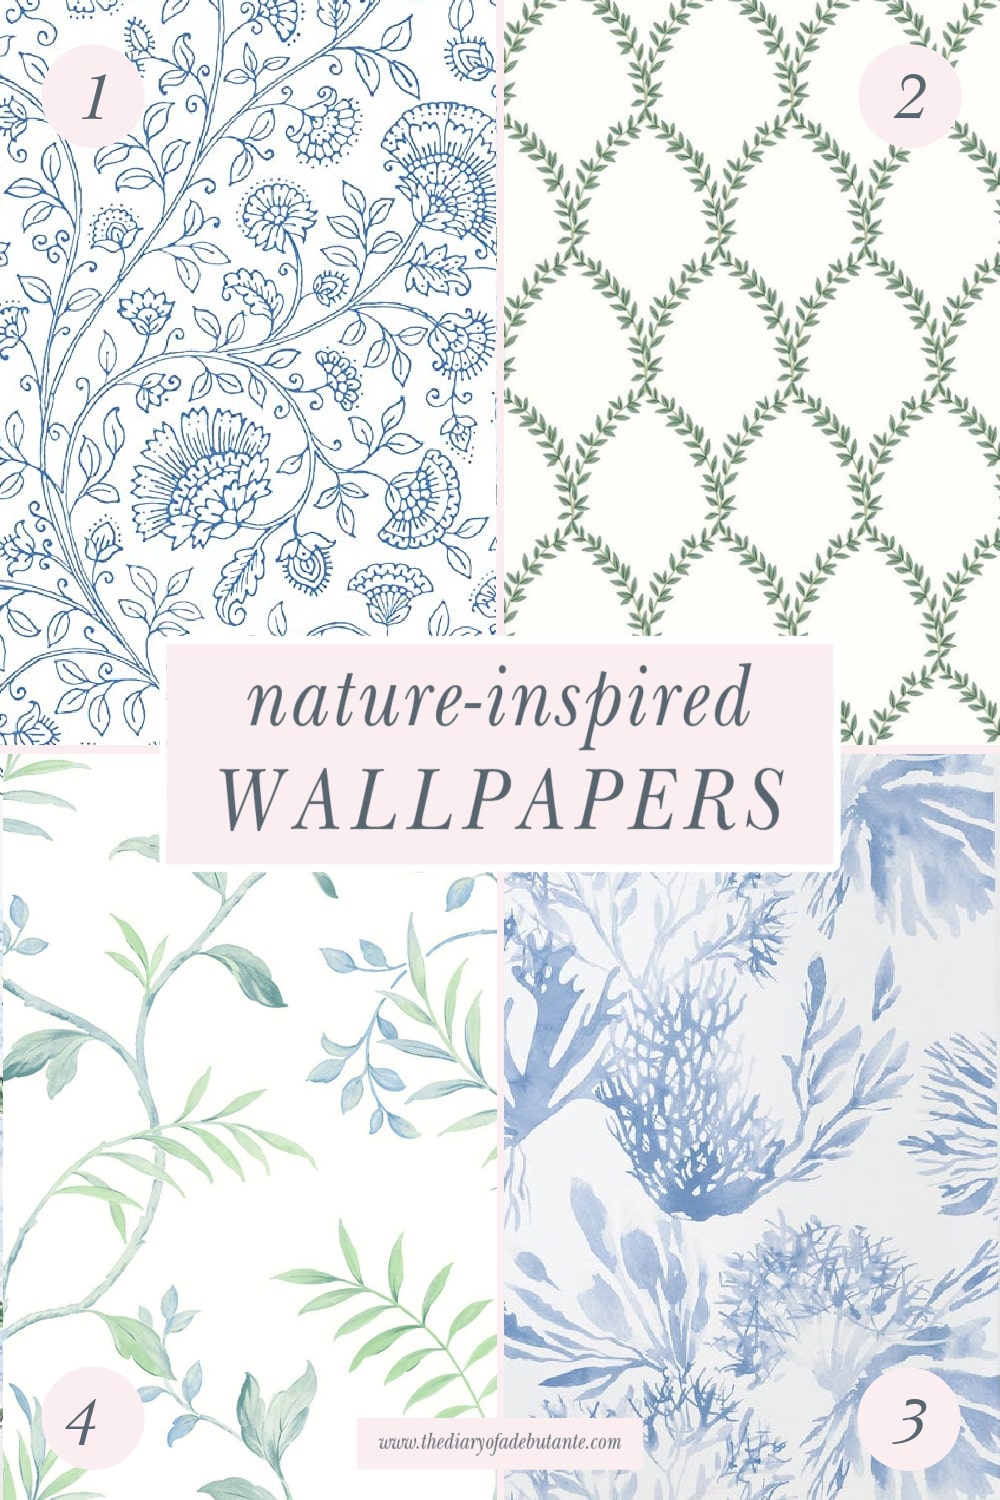 Nature-inspired wallpaper ideas for living room accent wall from blogger Stephanie Ziajka on Diary of a Debutante